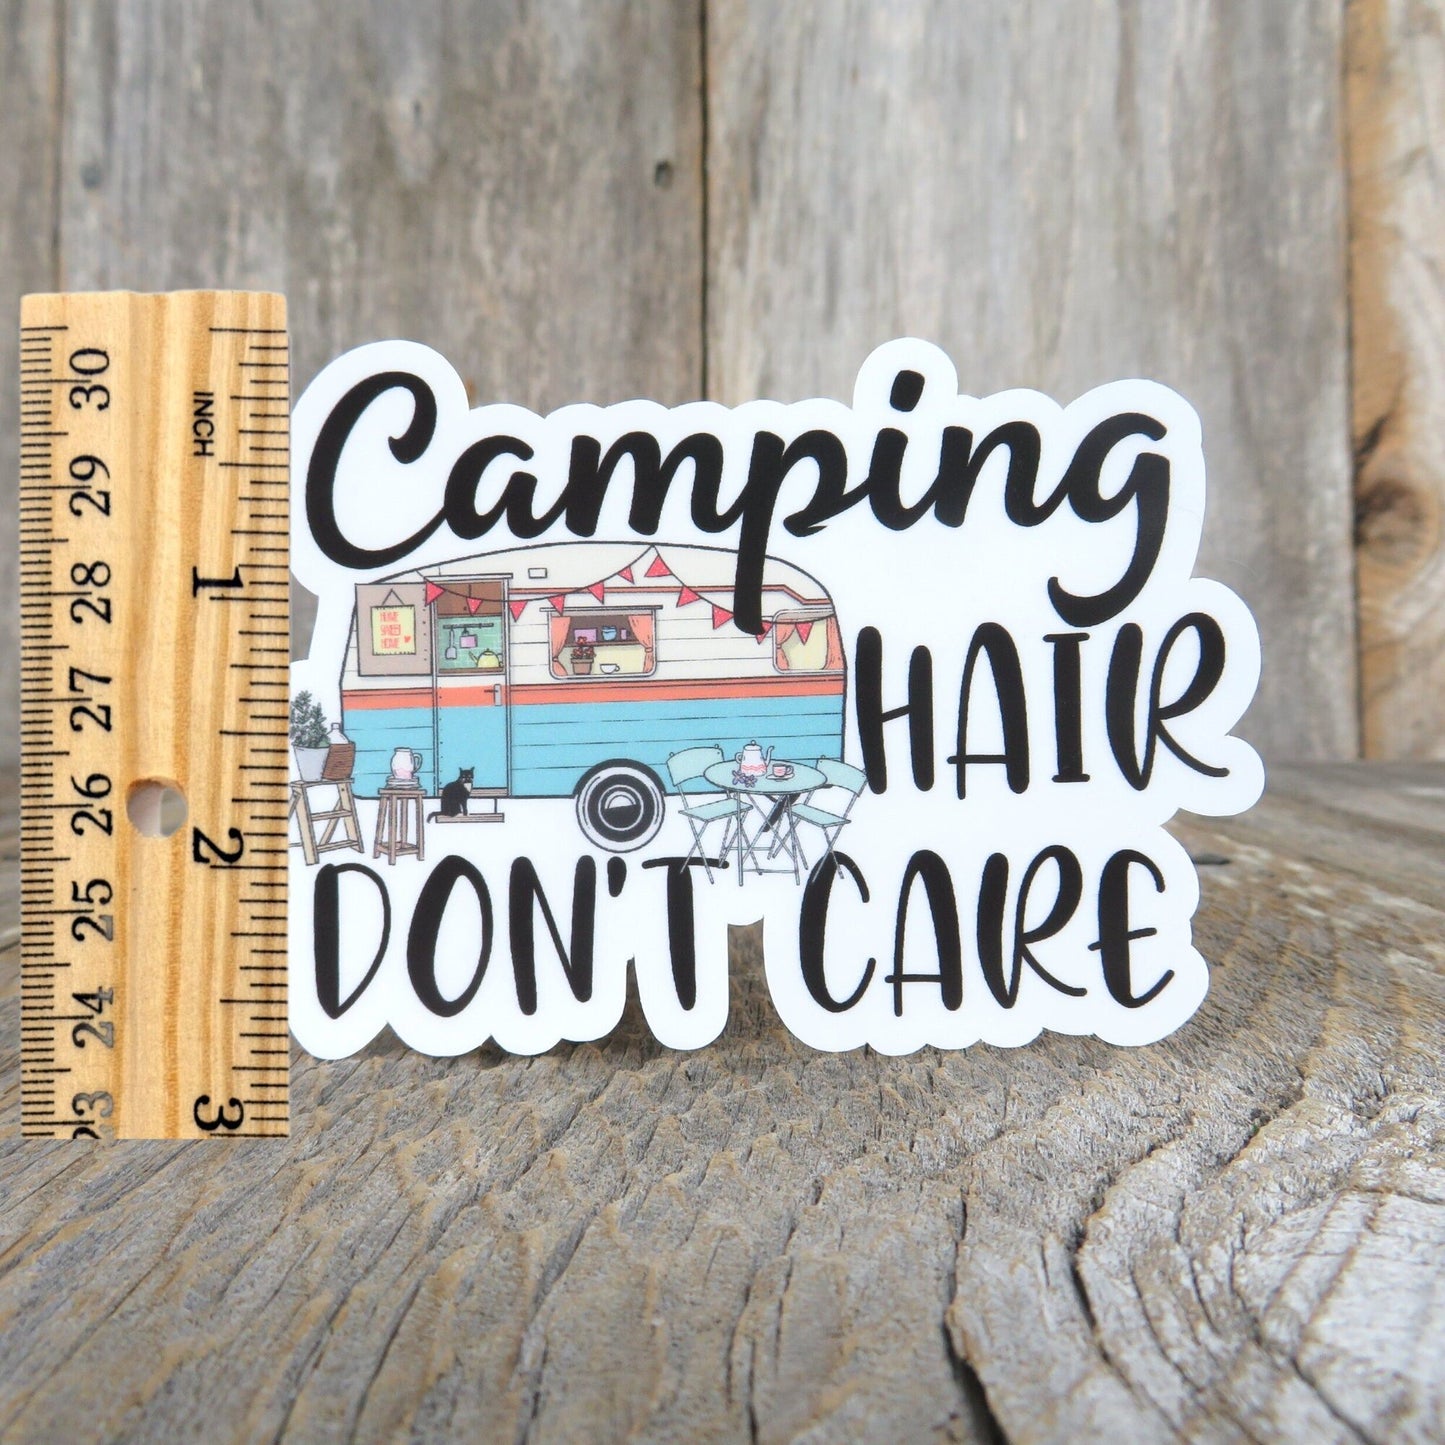 Camping Hair Don't Care Sticker Waterproof Travel Trailer Sticker Messy Bun Mountains Woods Outdoors Retro Colors